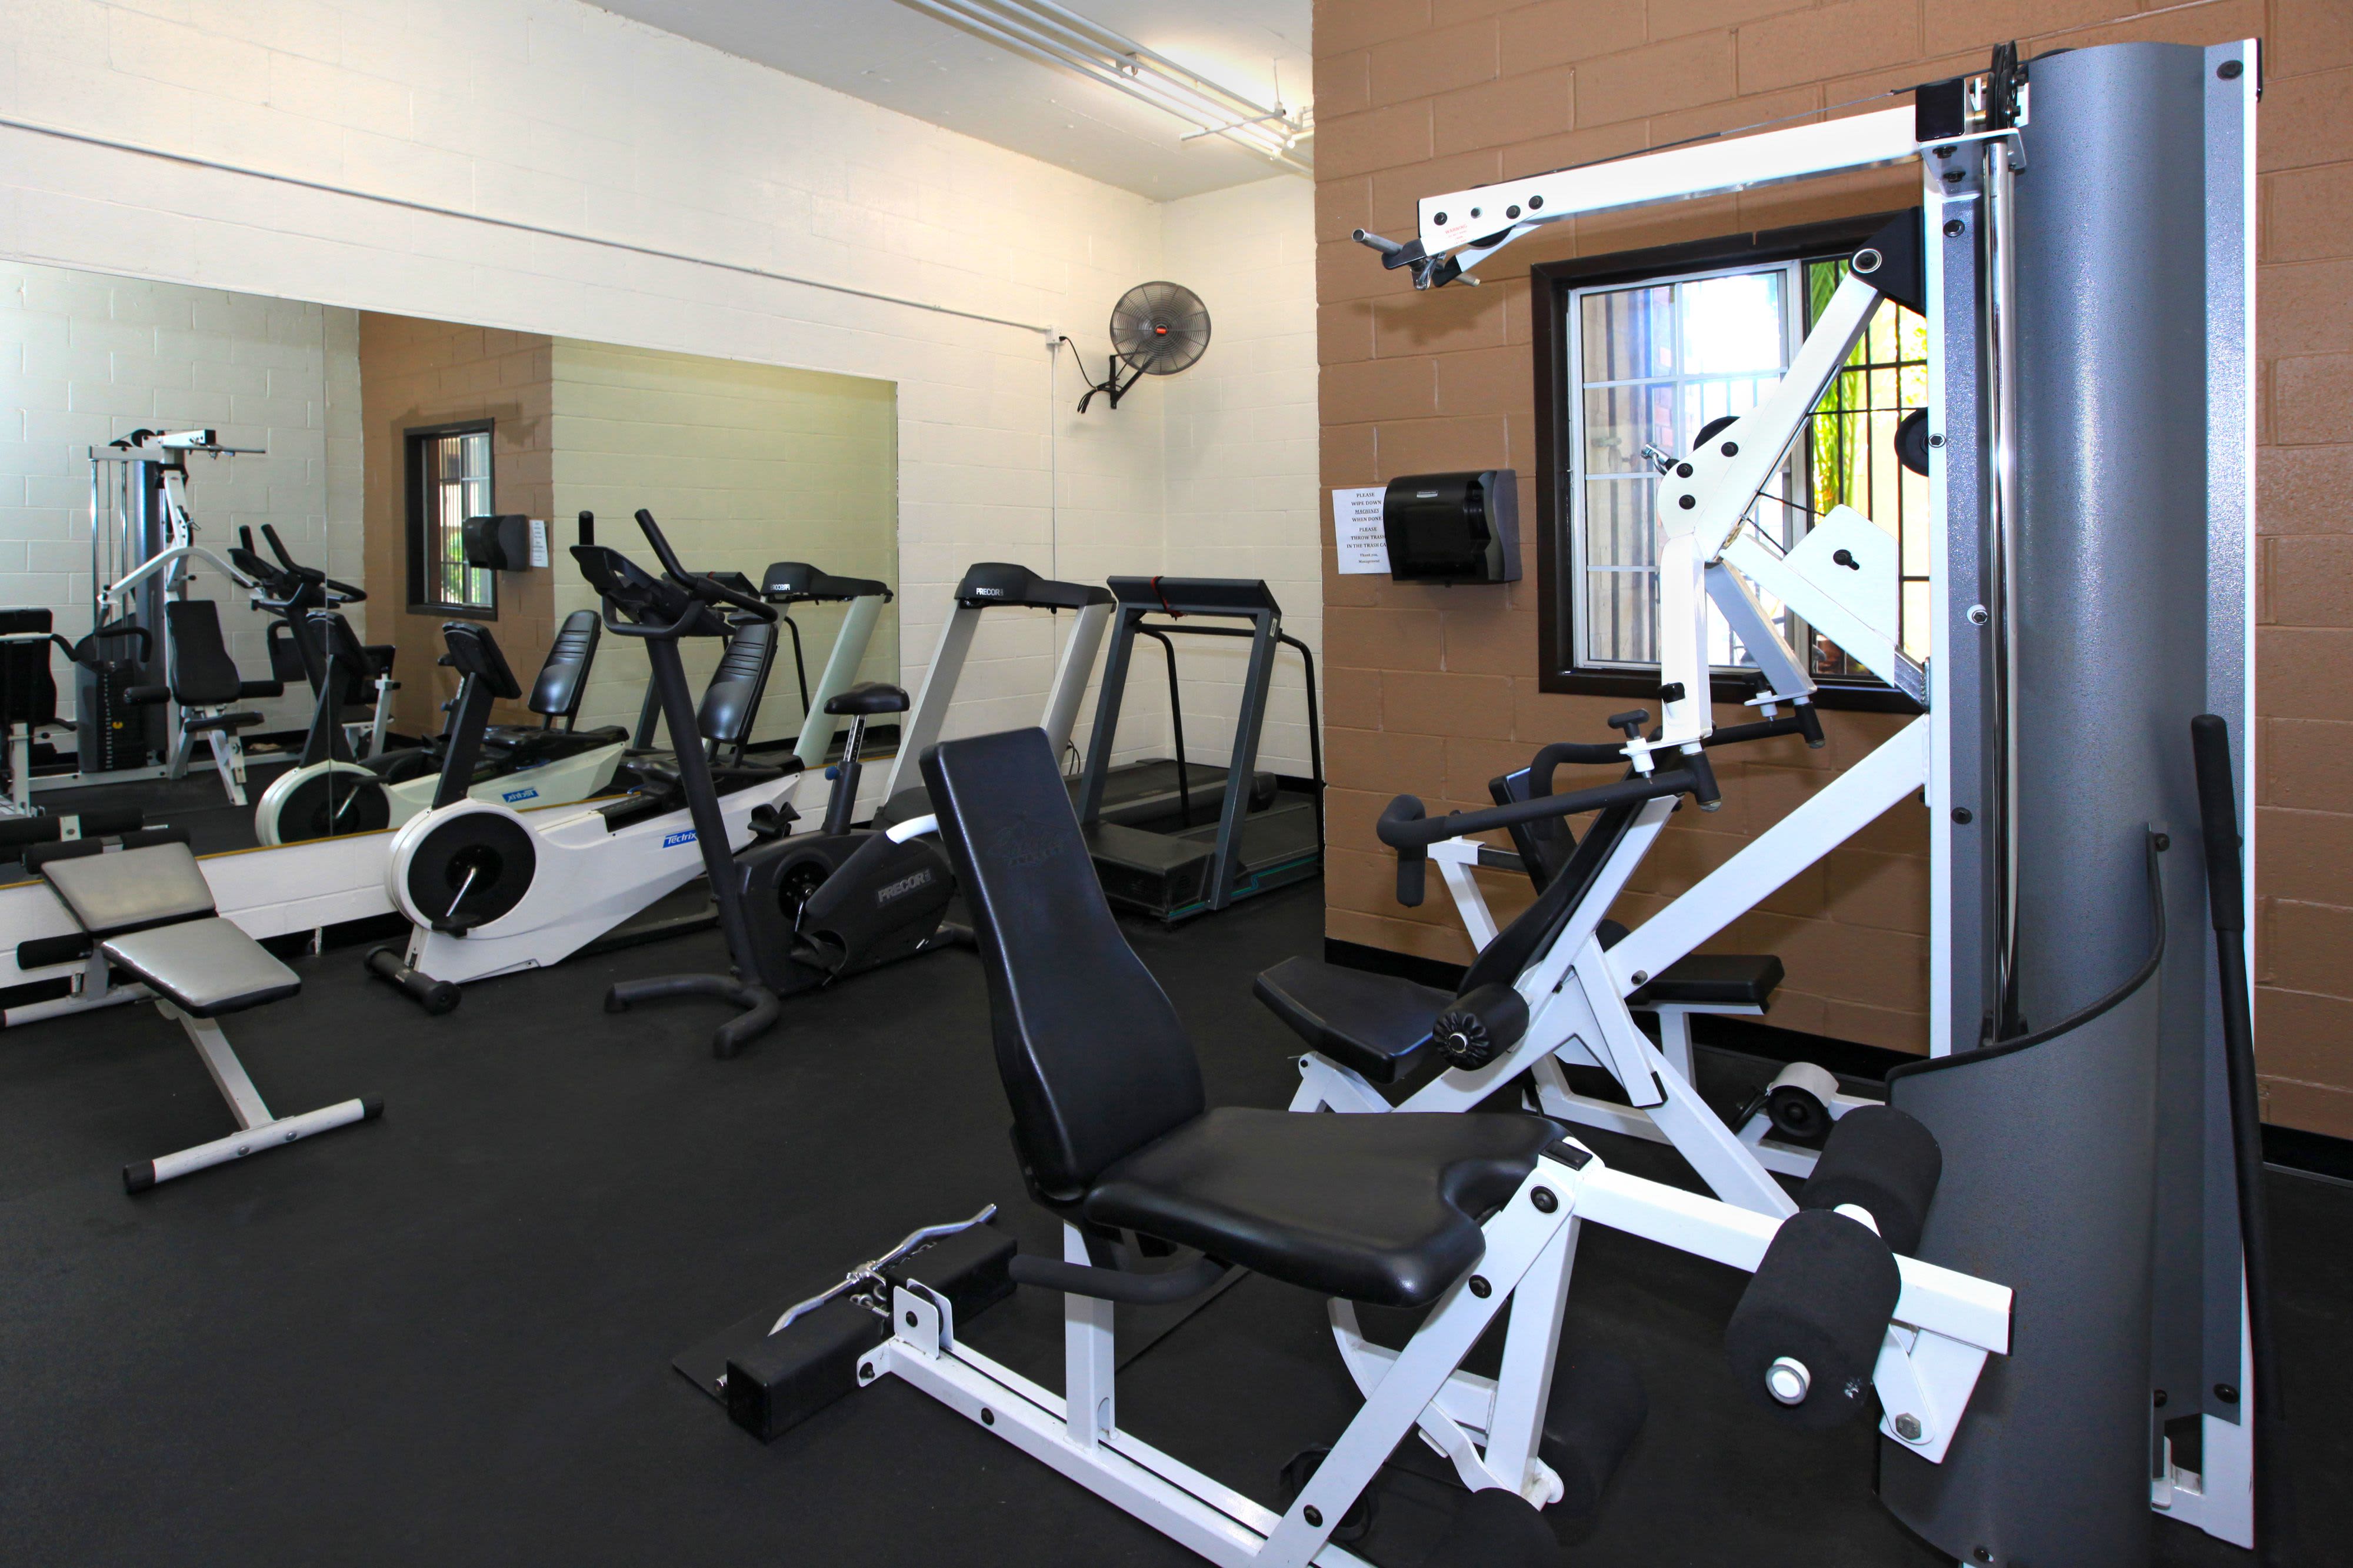 Fitness center at Savoy West Apartments in Los Angeles, California